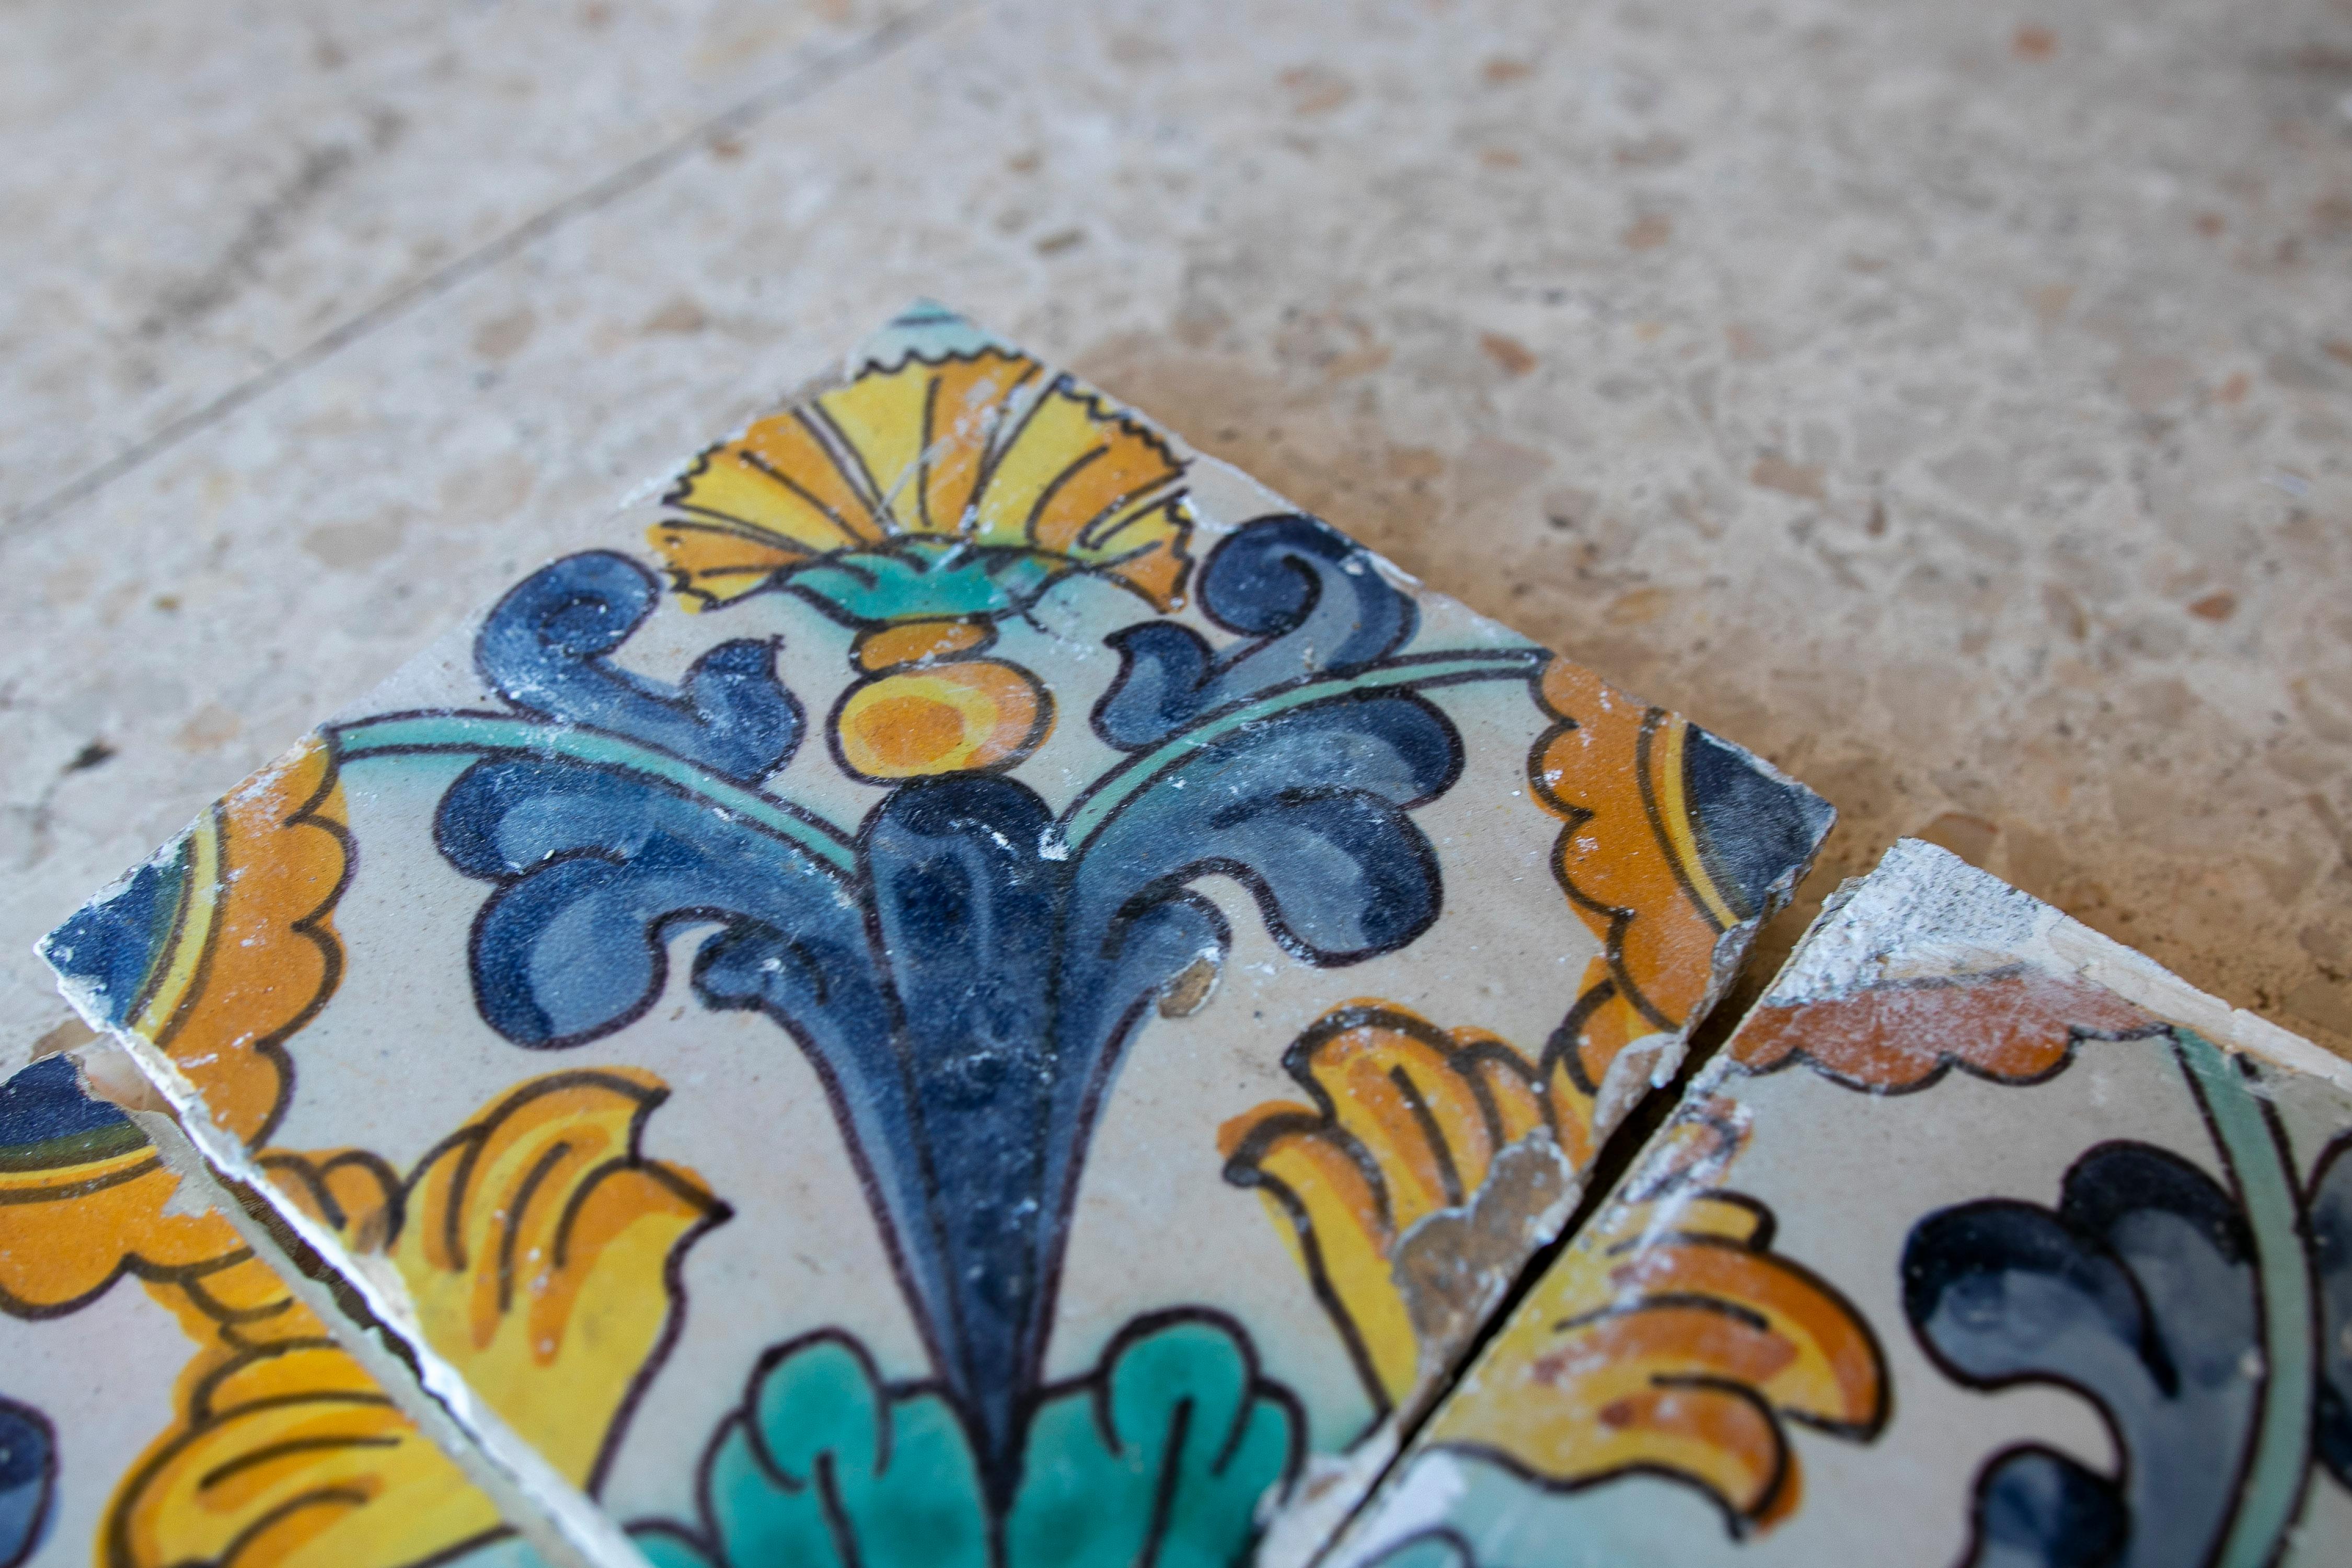 Set of 4 Mid-19th Century Spanish Hand Painted Patterned Glazed Ceramic Tiles 4